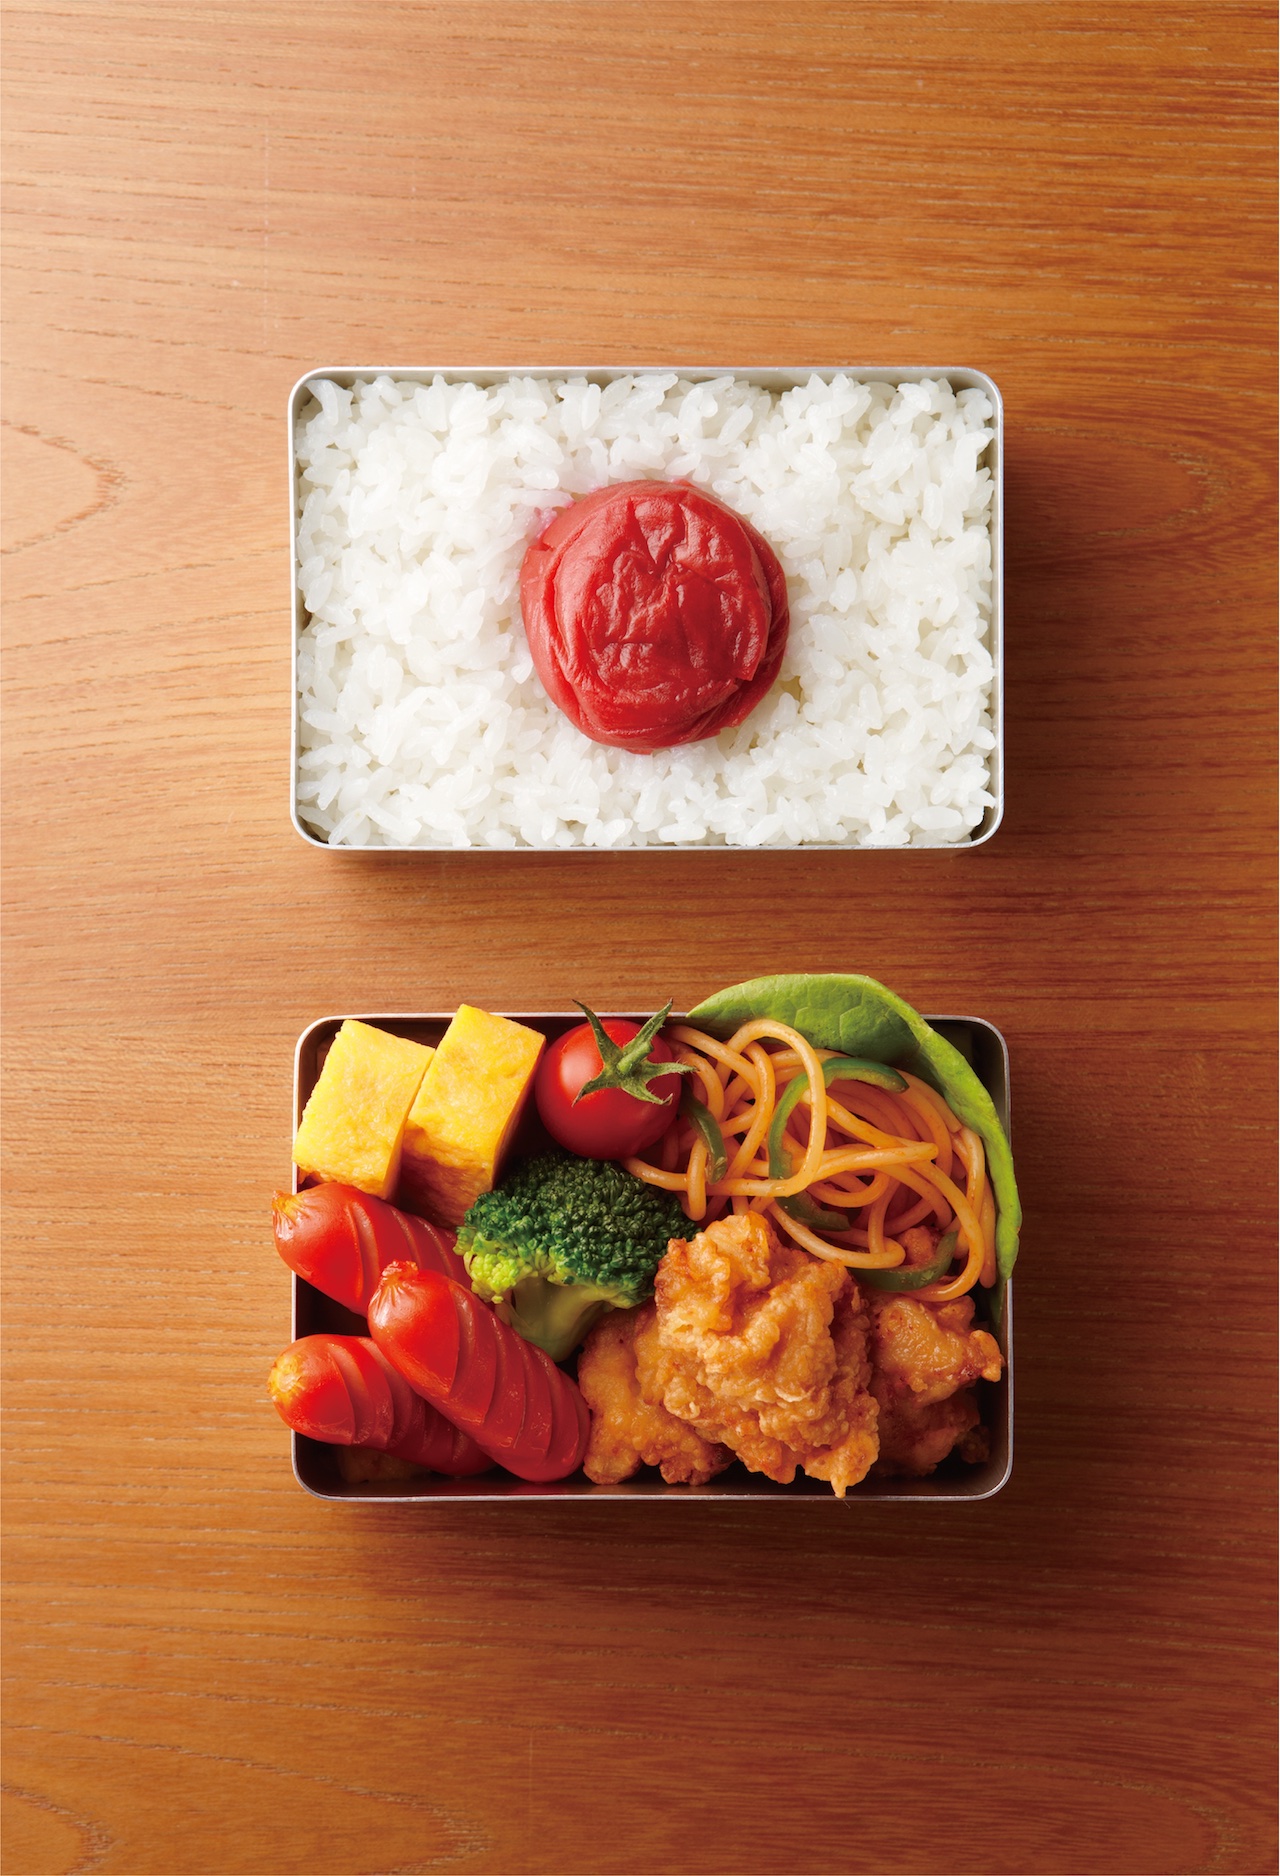 THE LUNCH BOX